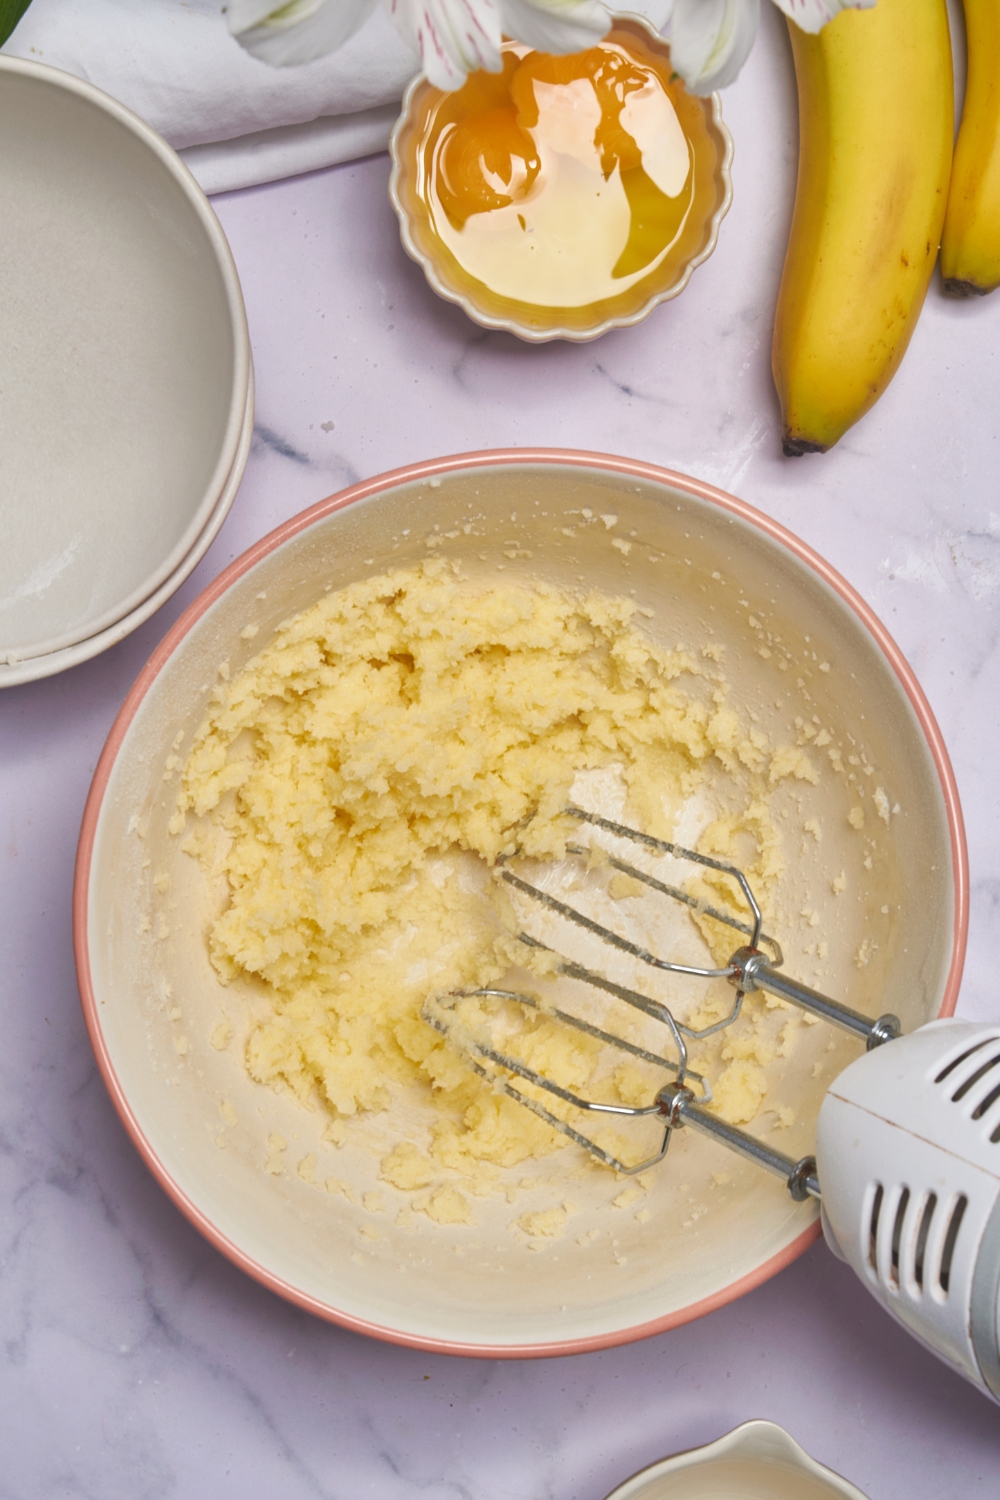 A mixing bowl with creamed butter and sugar.